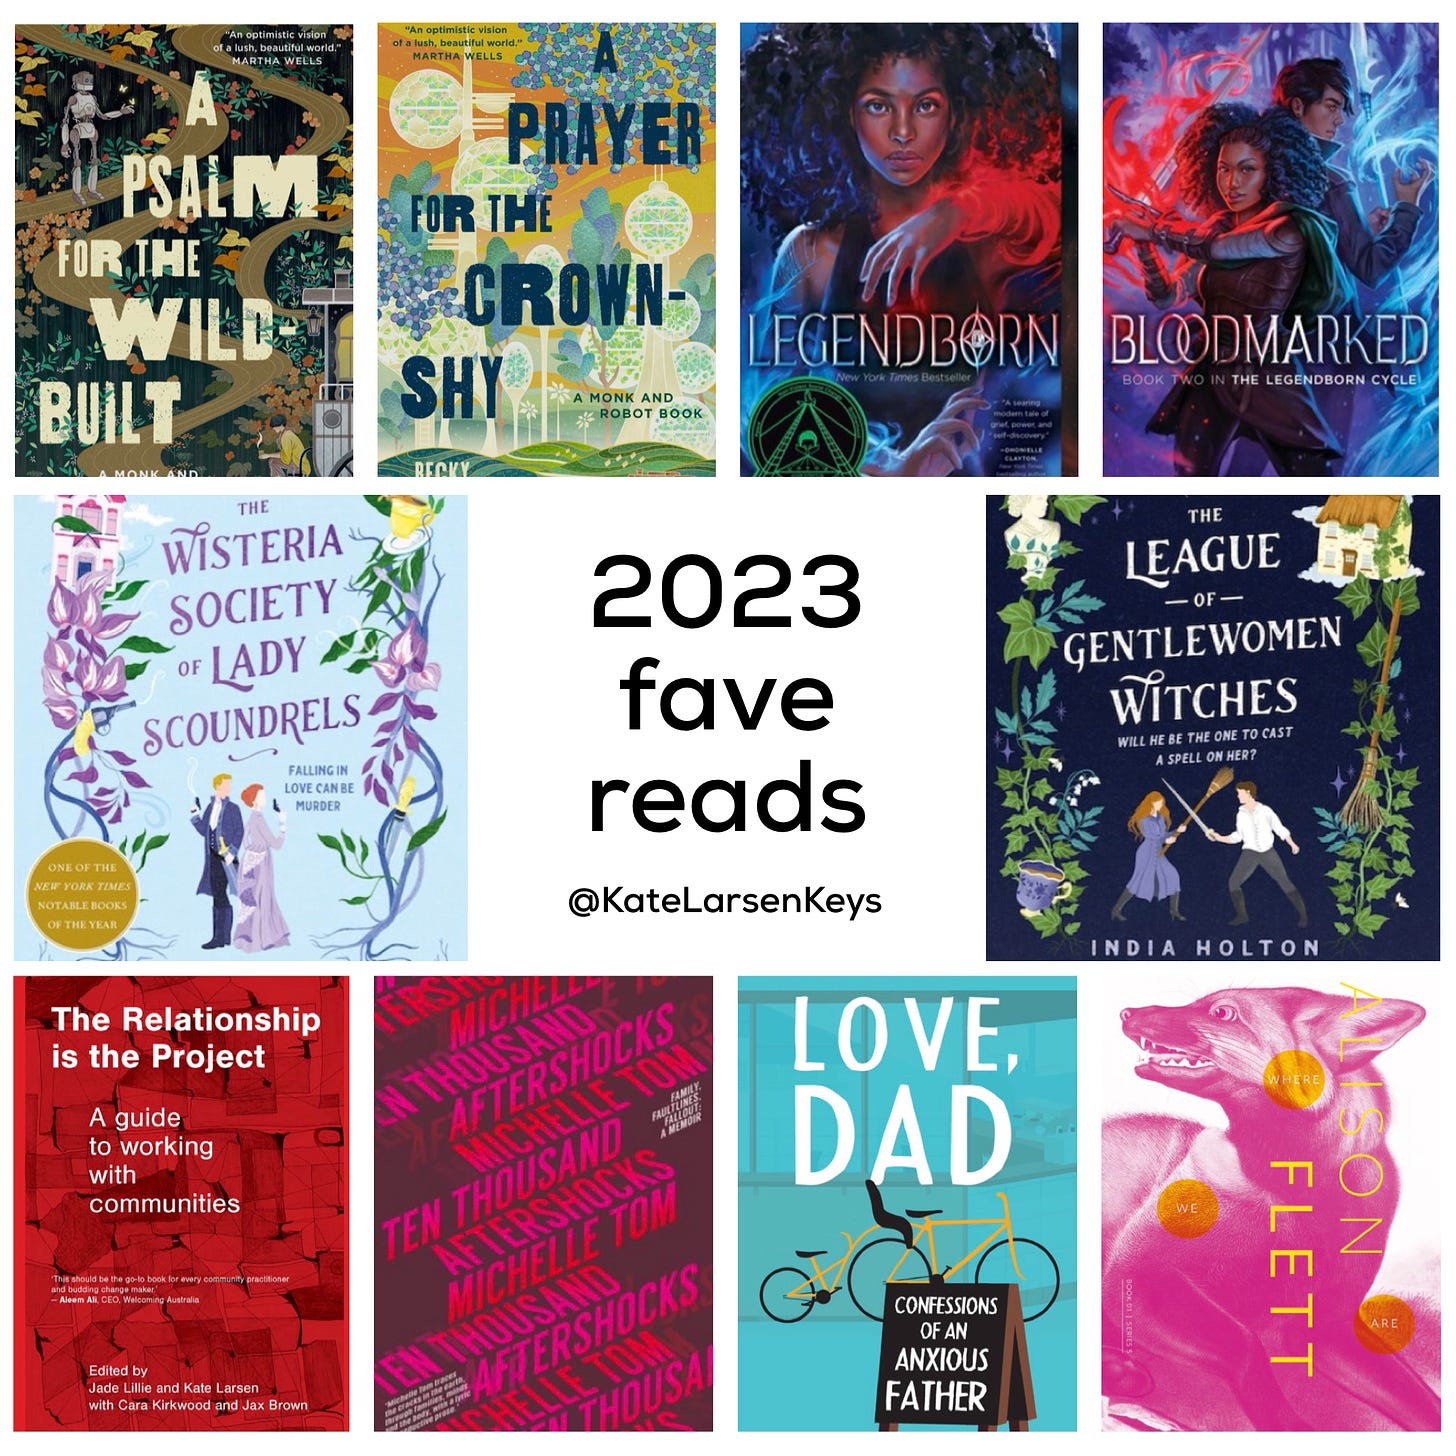 2023 fave reads @KateLarsenKeys with collage of 10 book covers